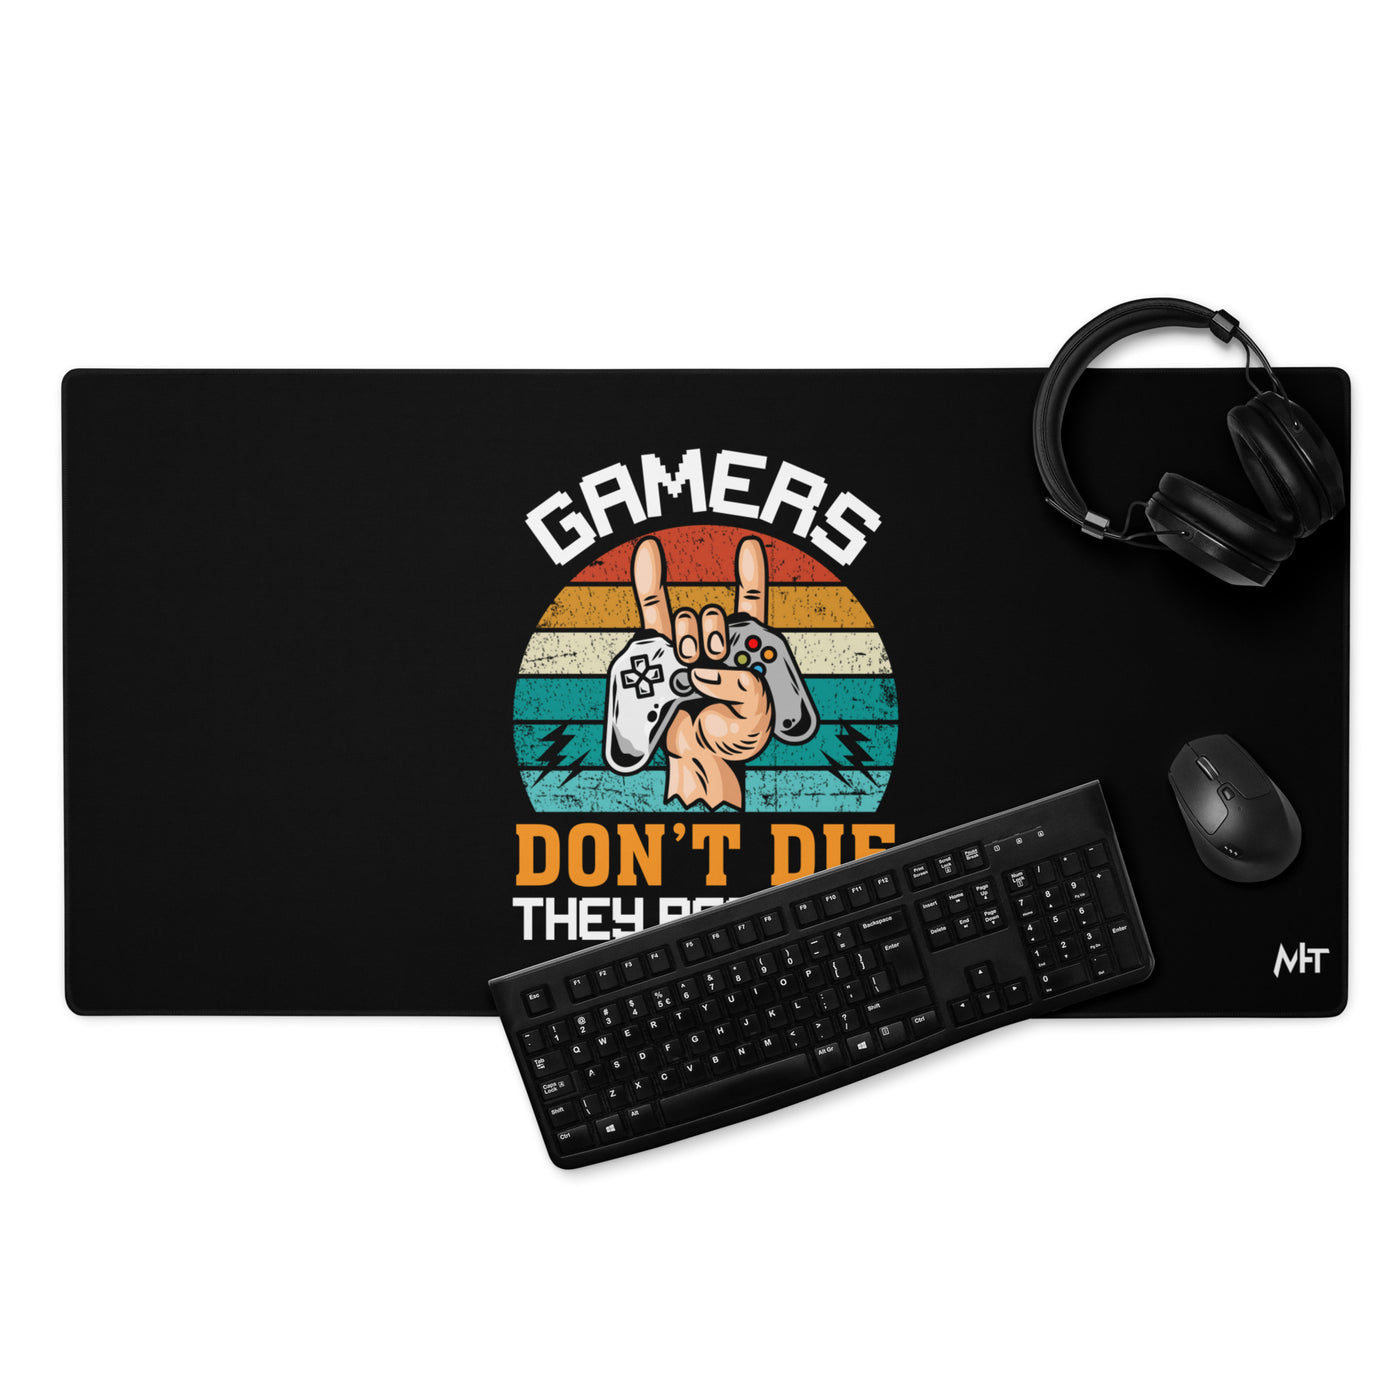 Gamers don't Die, they Respawn - Gaming mouse pad